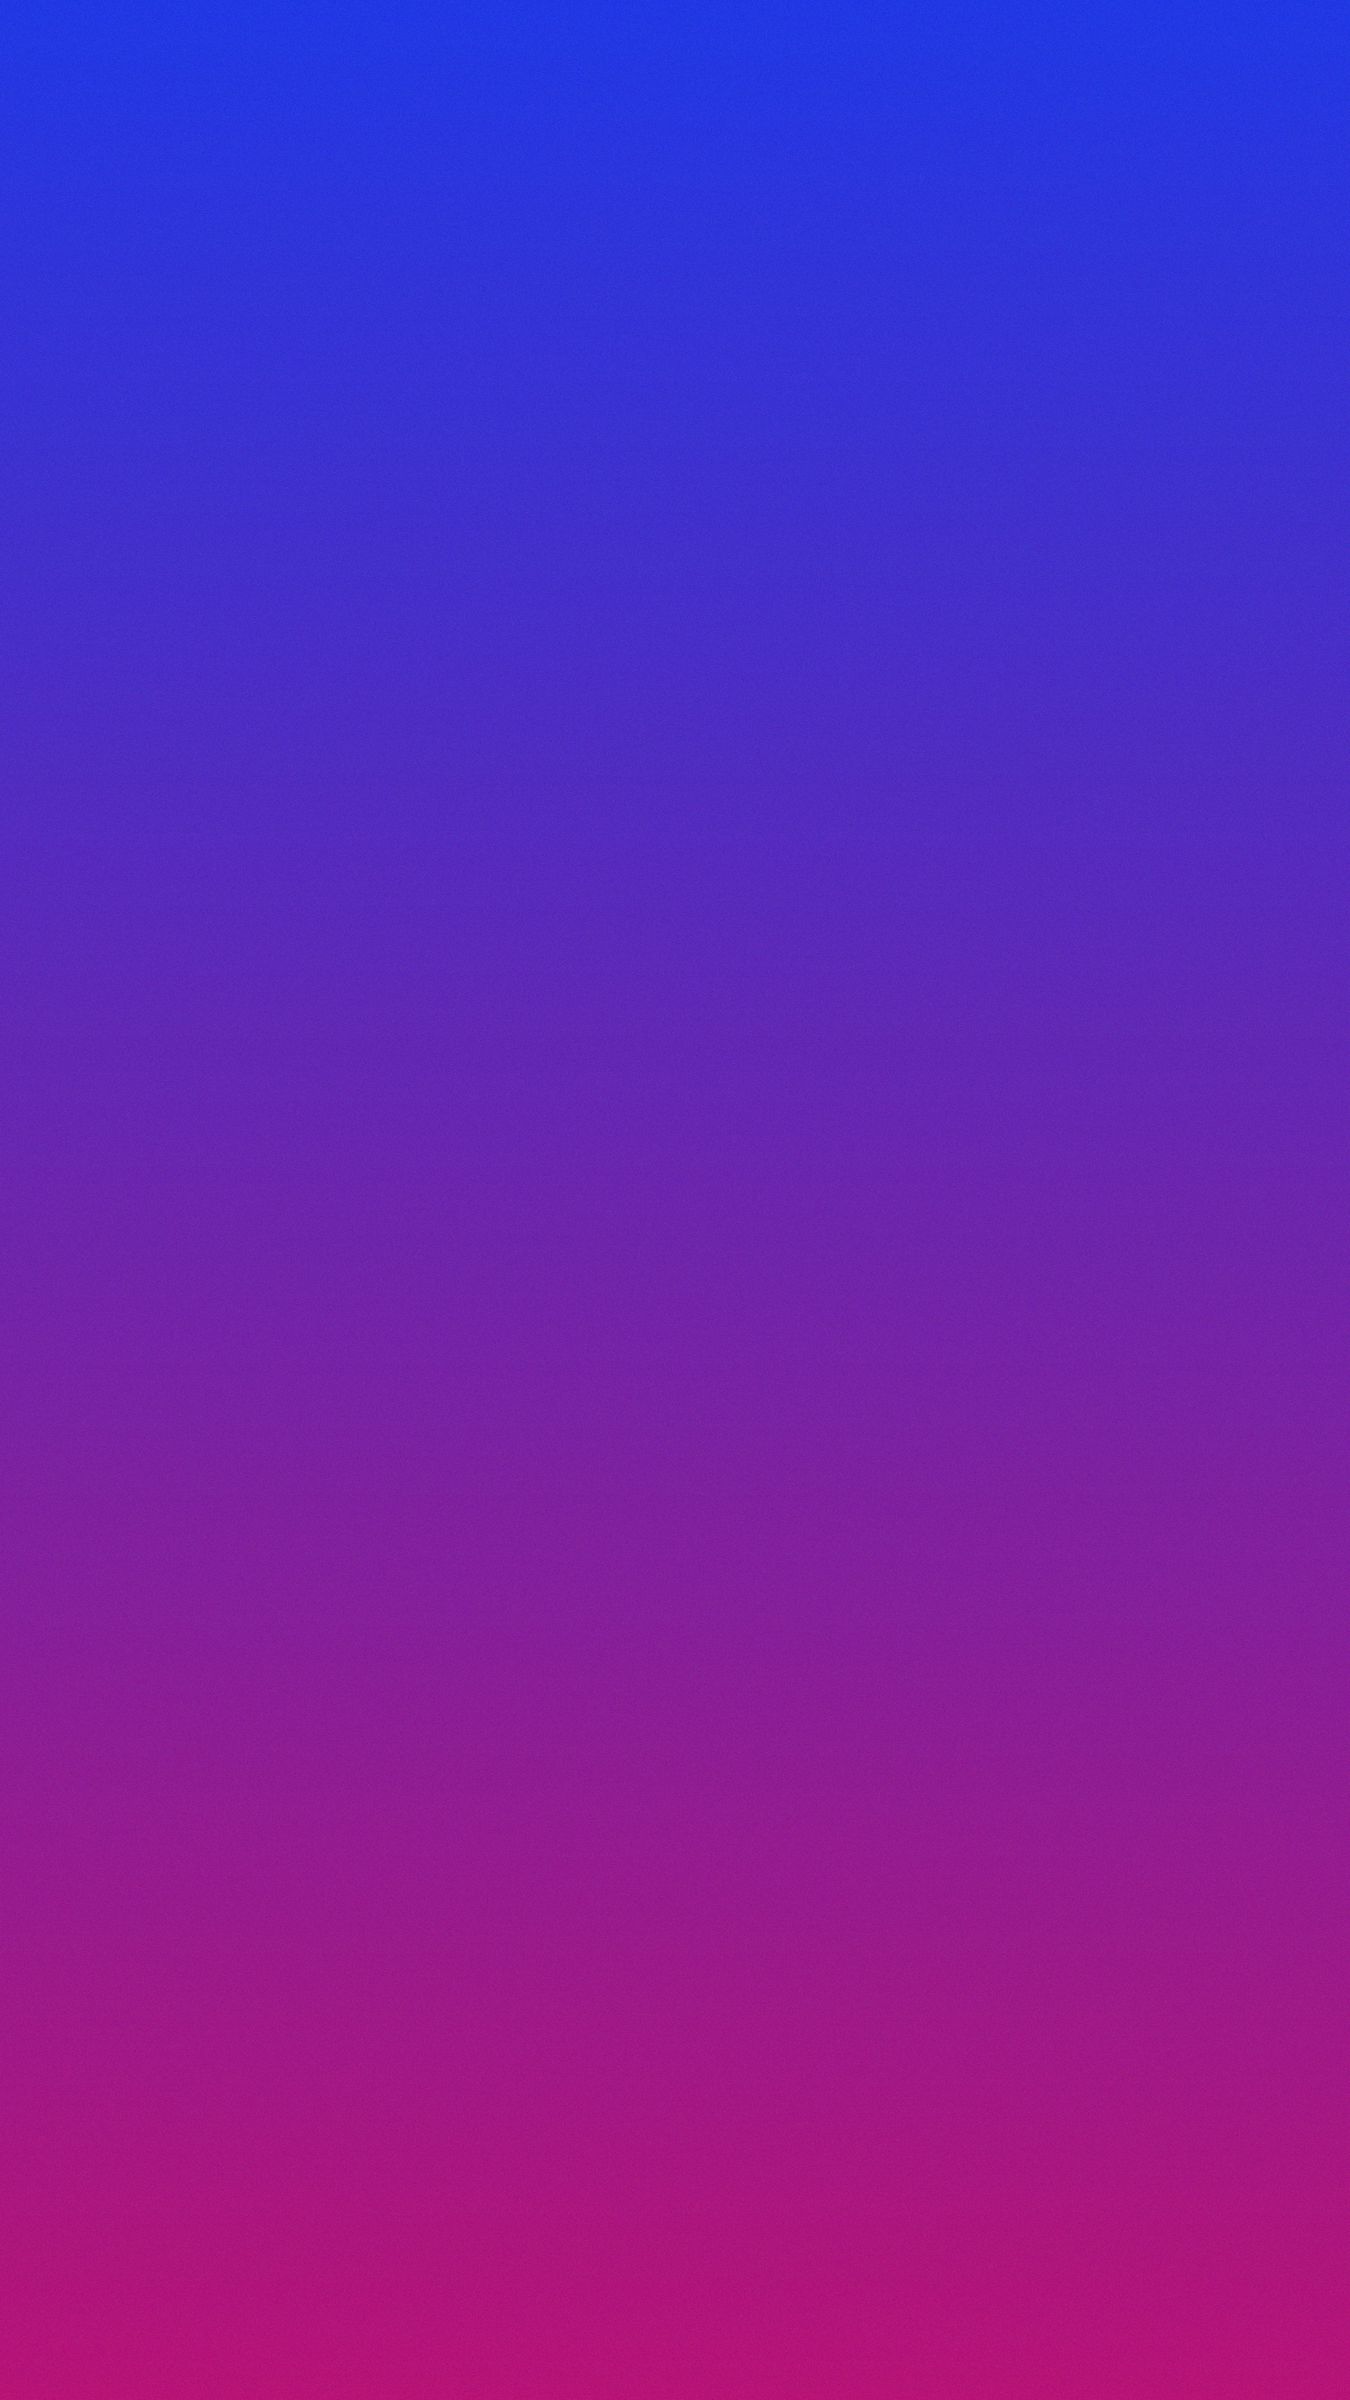 Download wallpaper 1350x2400 gradient, blue, purple, abstraction iphone 8+/7+/6s+/for parallax HD background